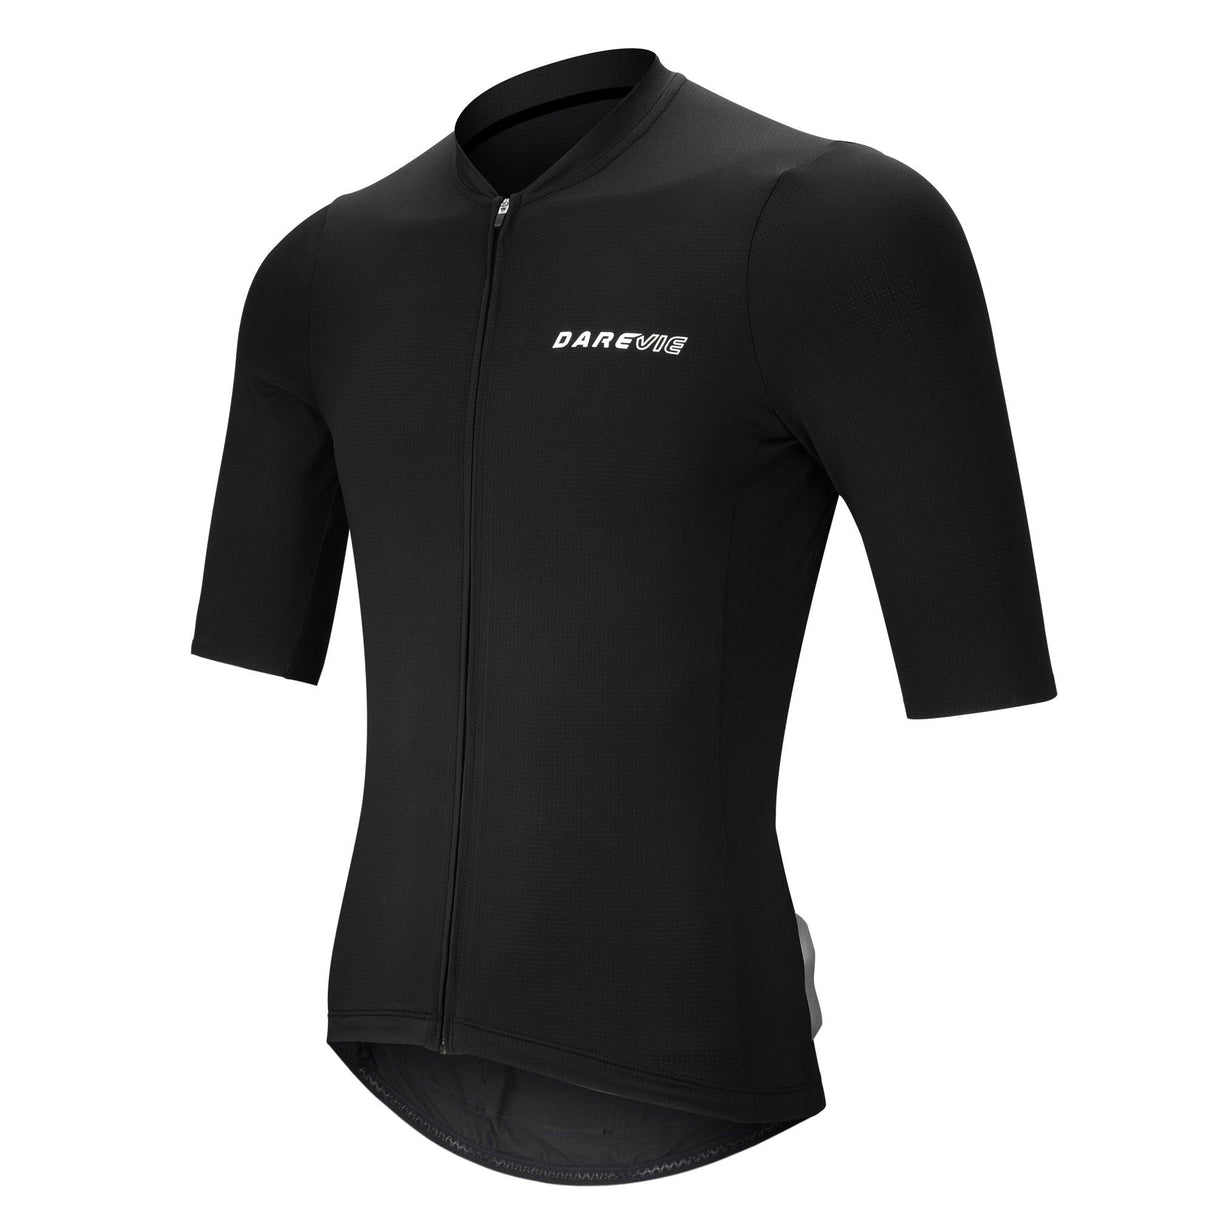 CARBON CYCLING JERSEY-Black-Side-Darevie Shop